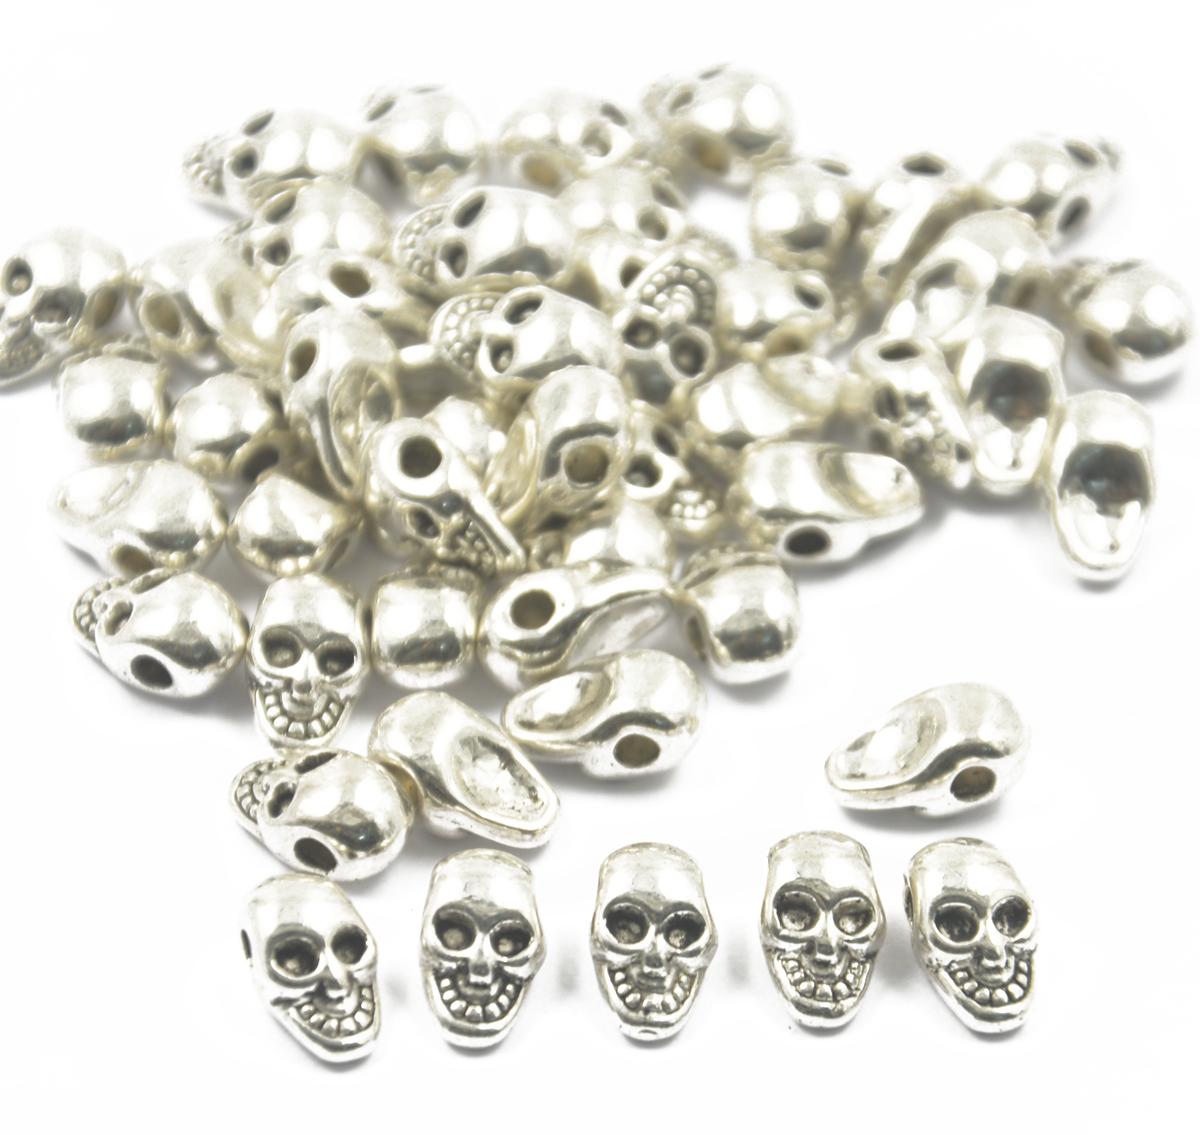 50pcs Antique Silver Tibet Alloy Skull Jewelry Making Spacer beads